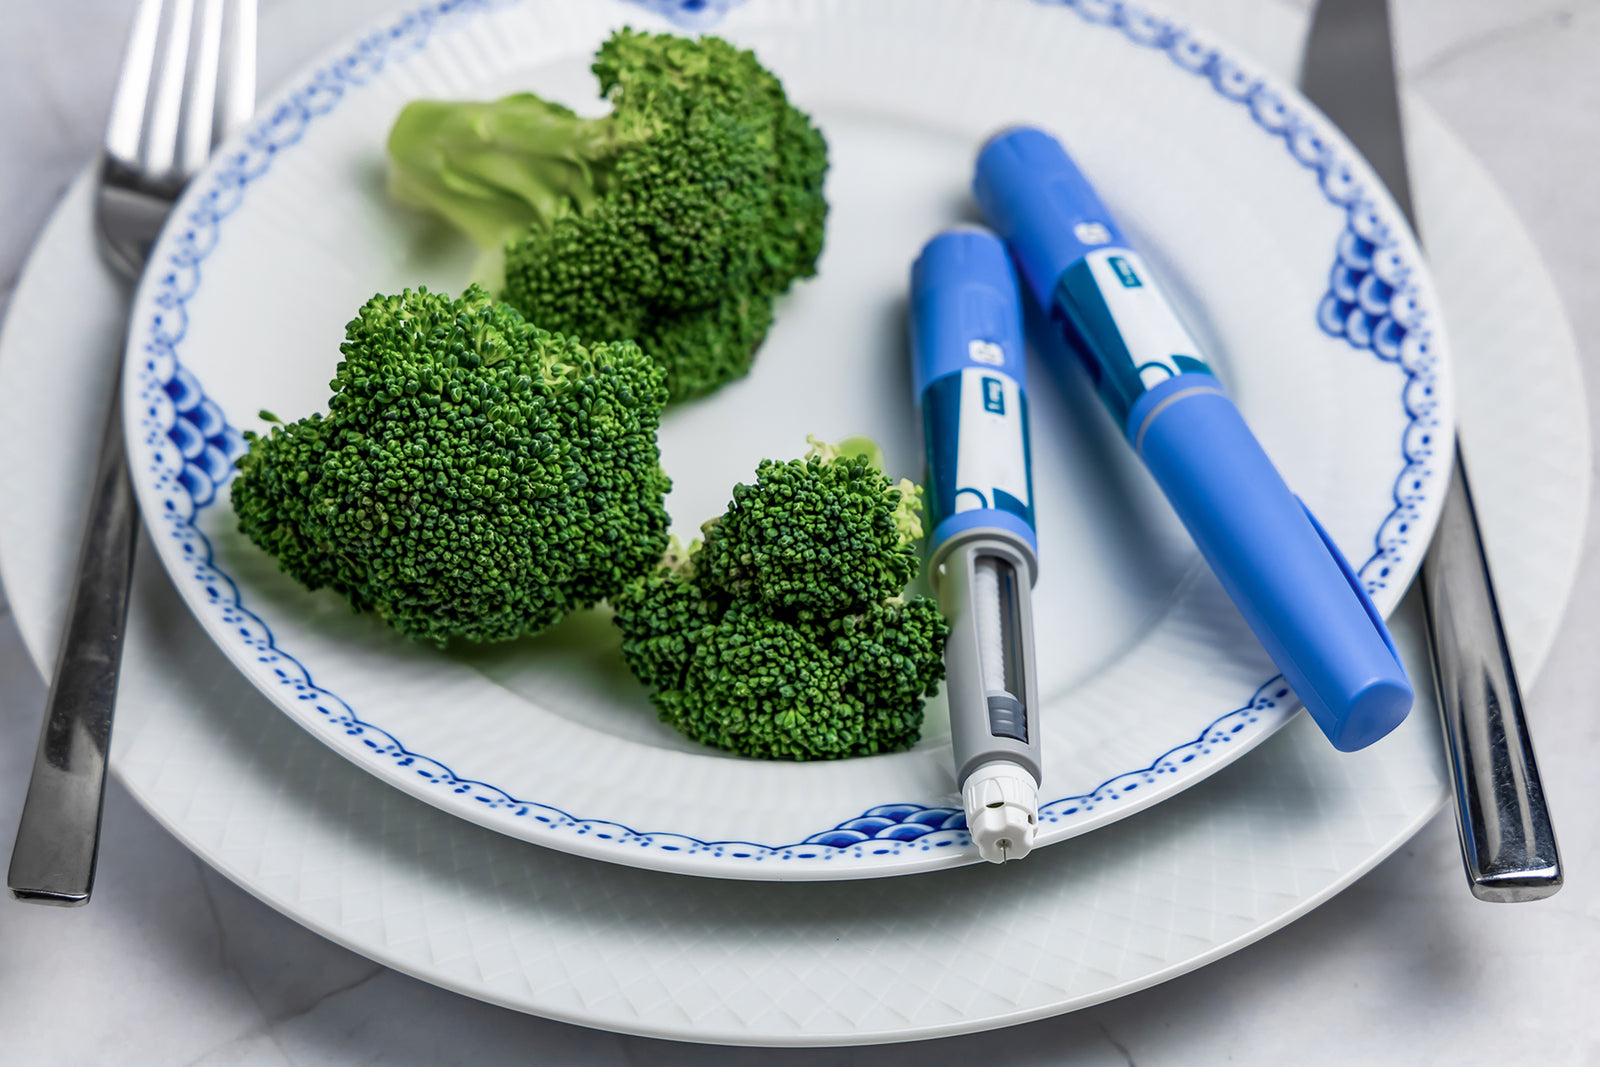 Two Ozempic pens sitting on a plate with tree pieces of broccoli